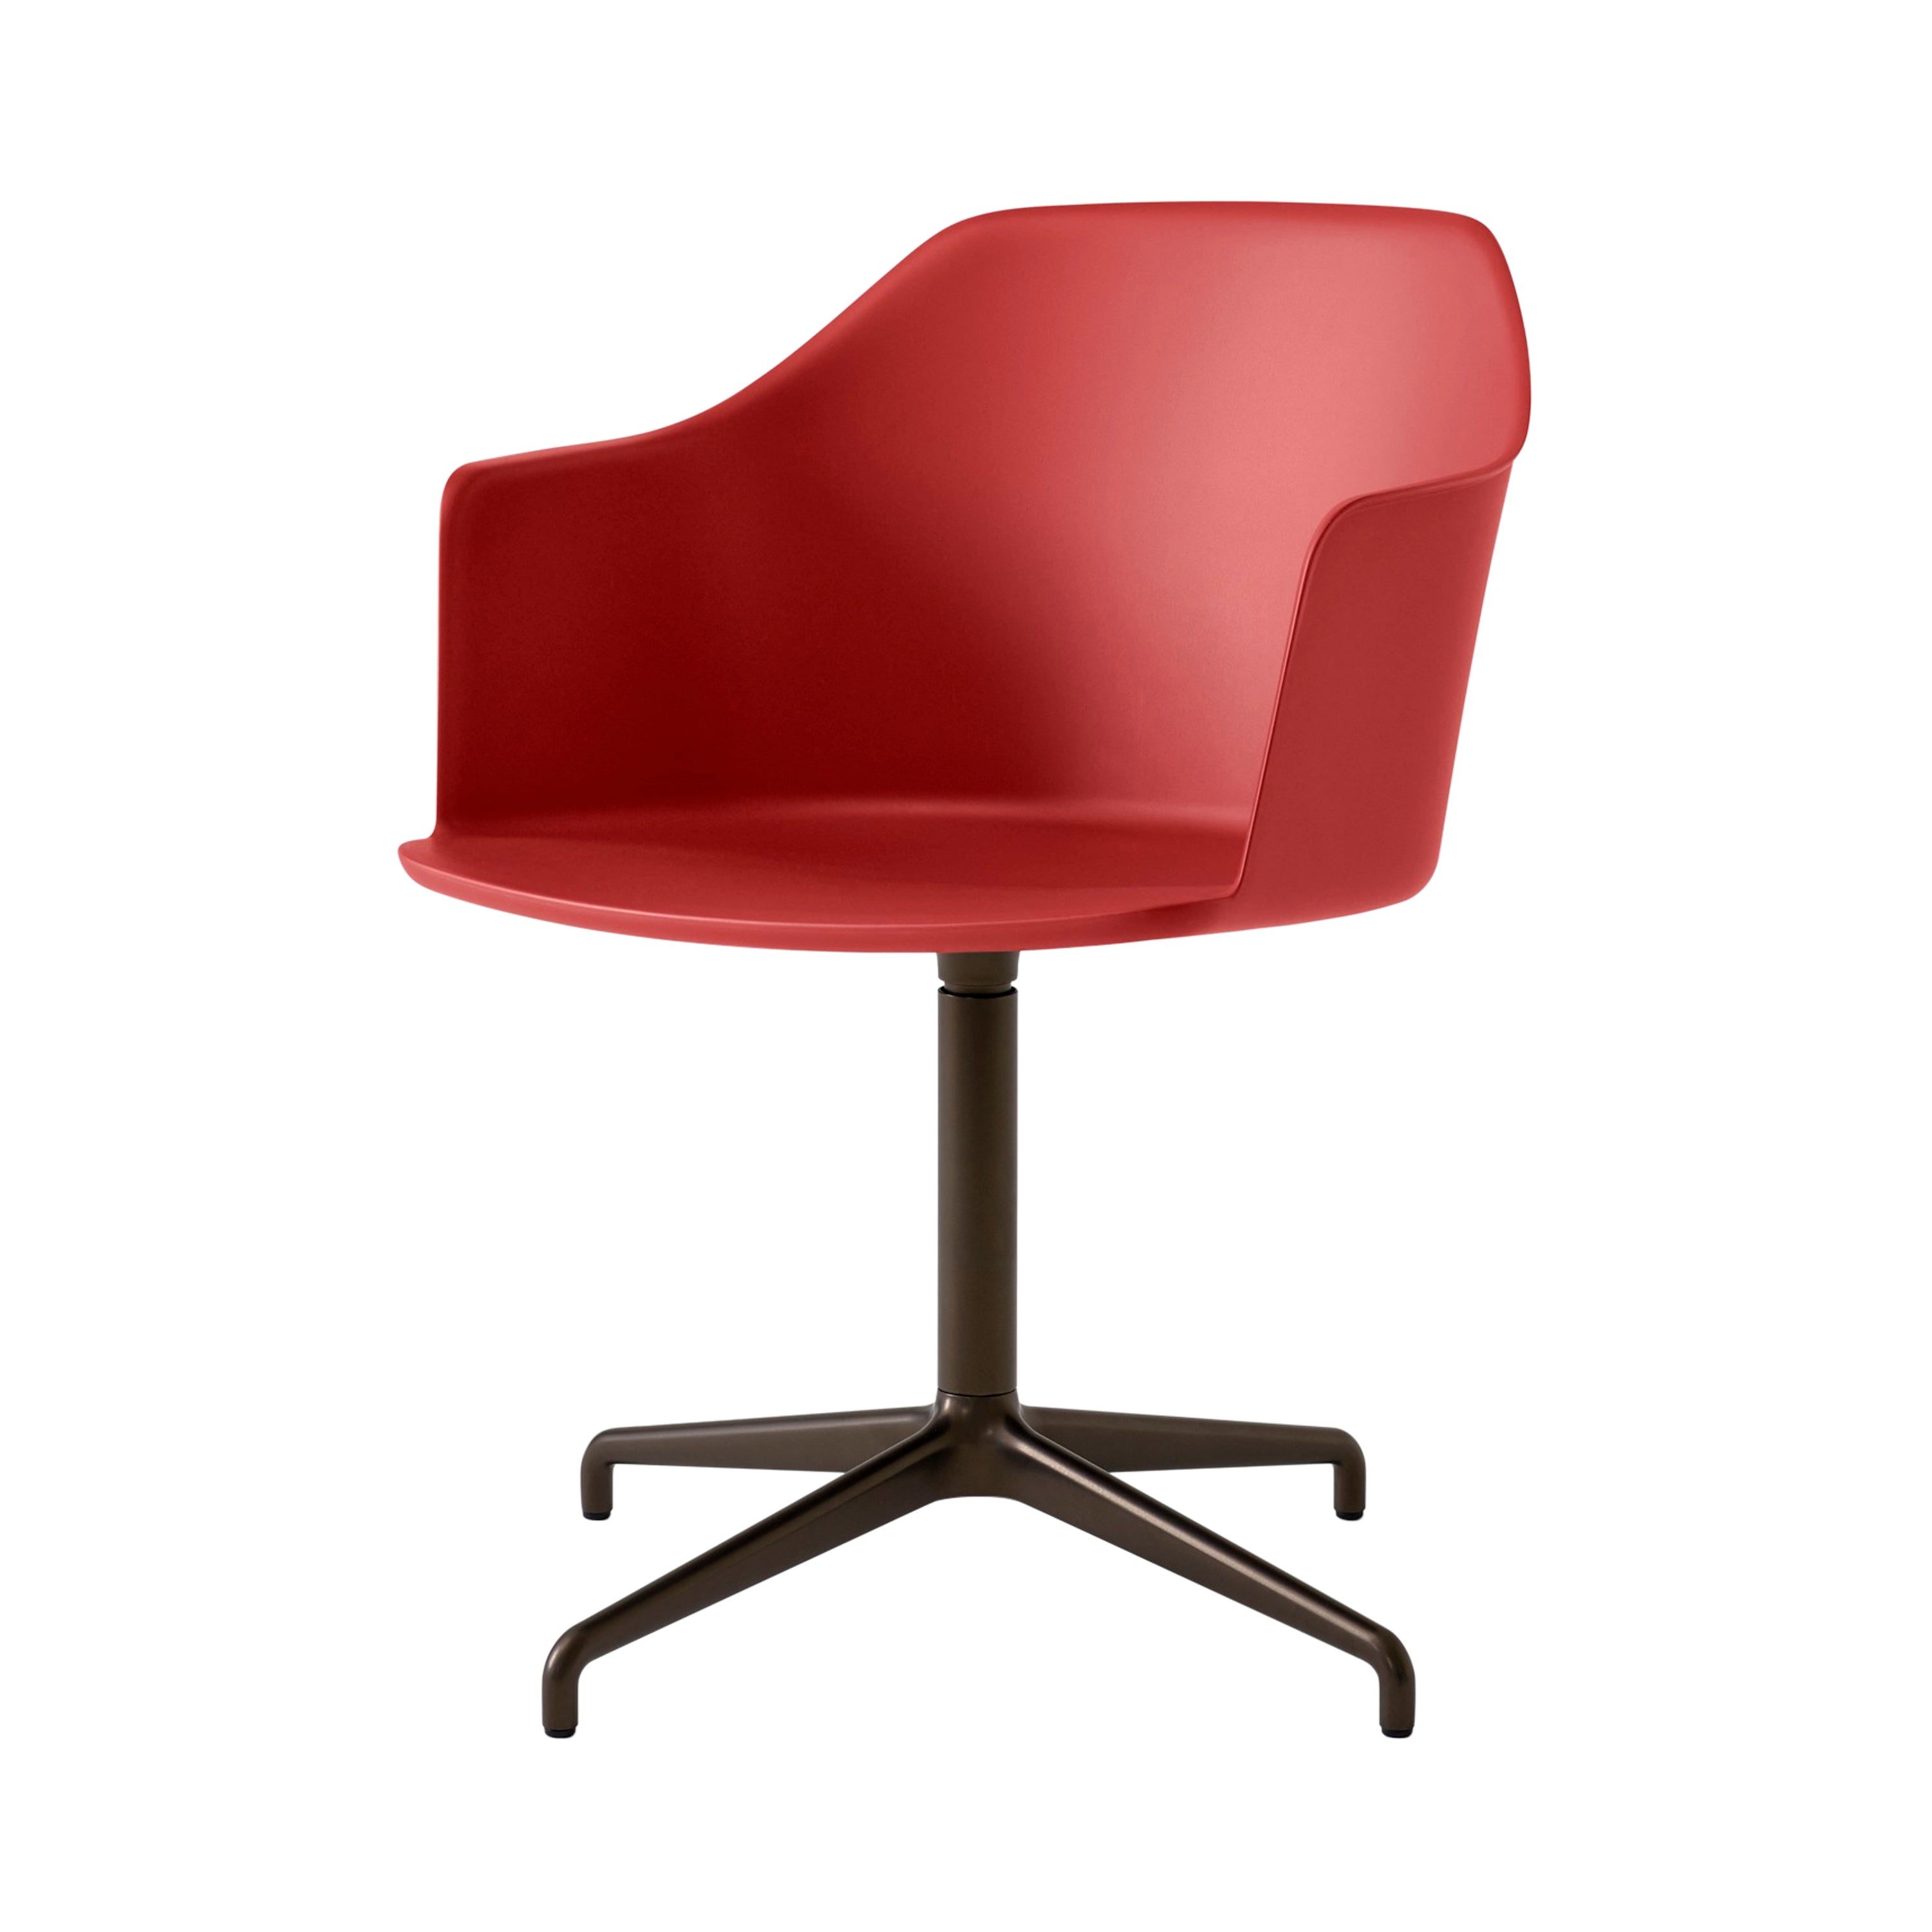 Rely Armchair HW43: Vermilion Red + Bronzed